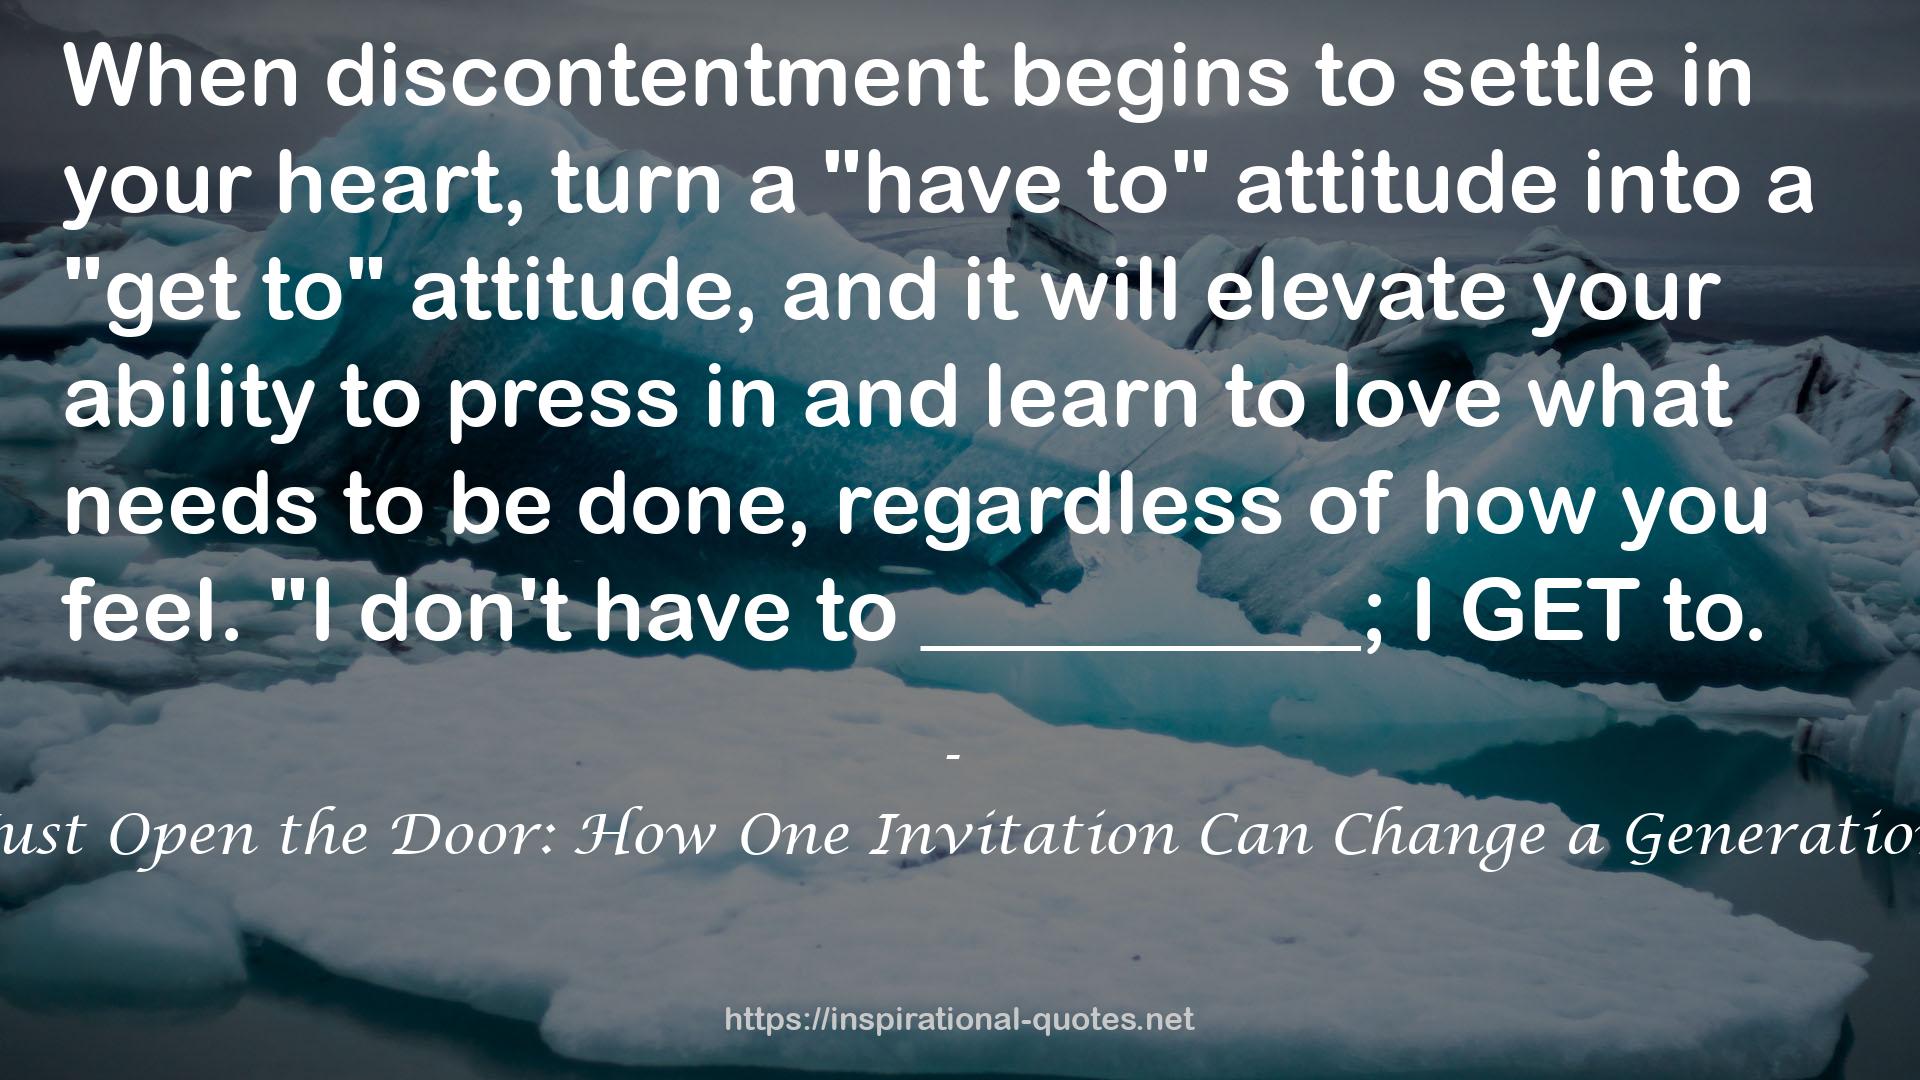 Just Open the Door: How One Invitation Can Change a Generation QUOTES